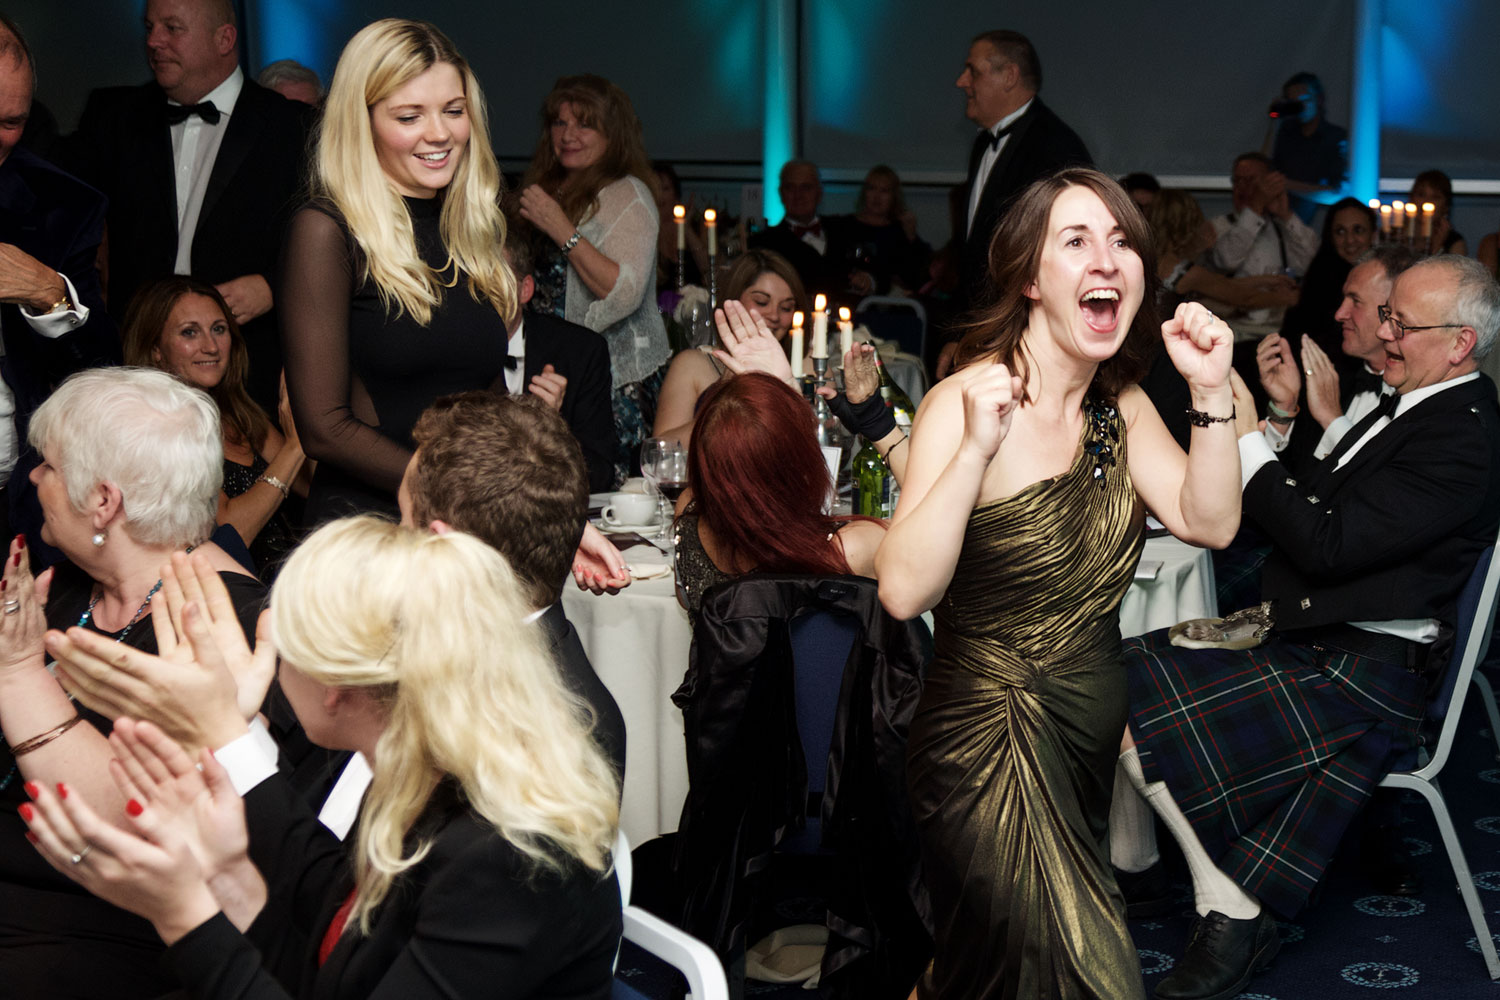 Commercial Event Photography - Adam Hillier Photography